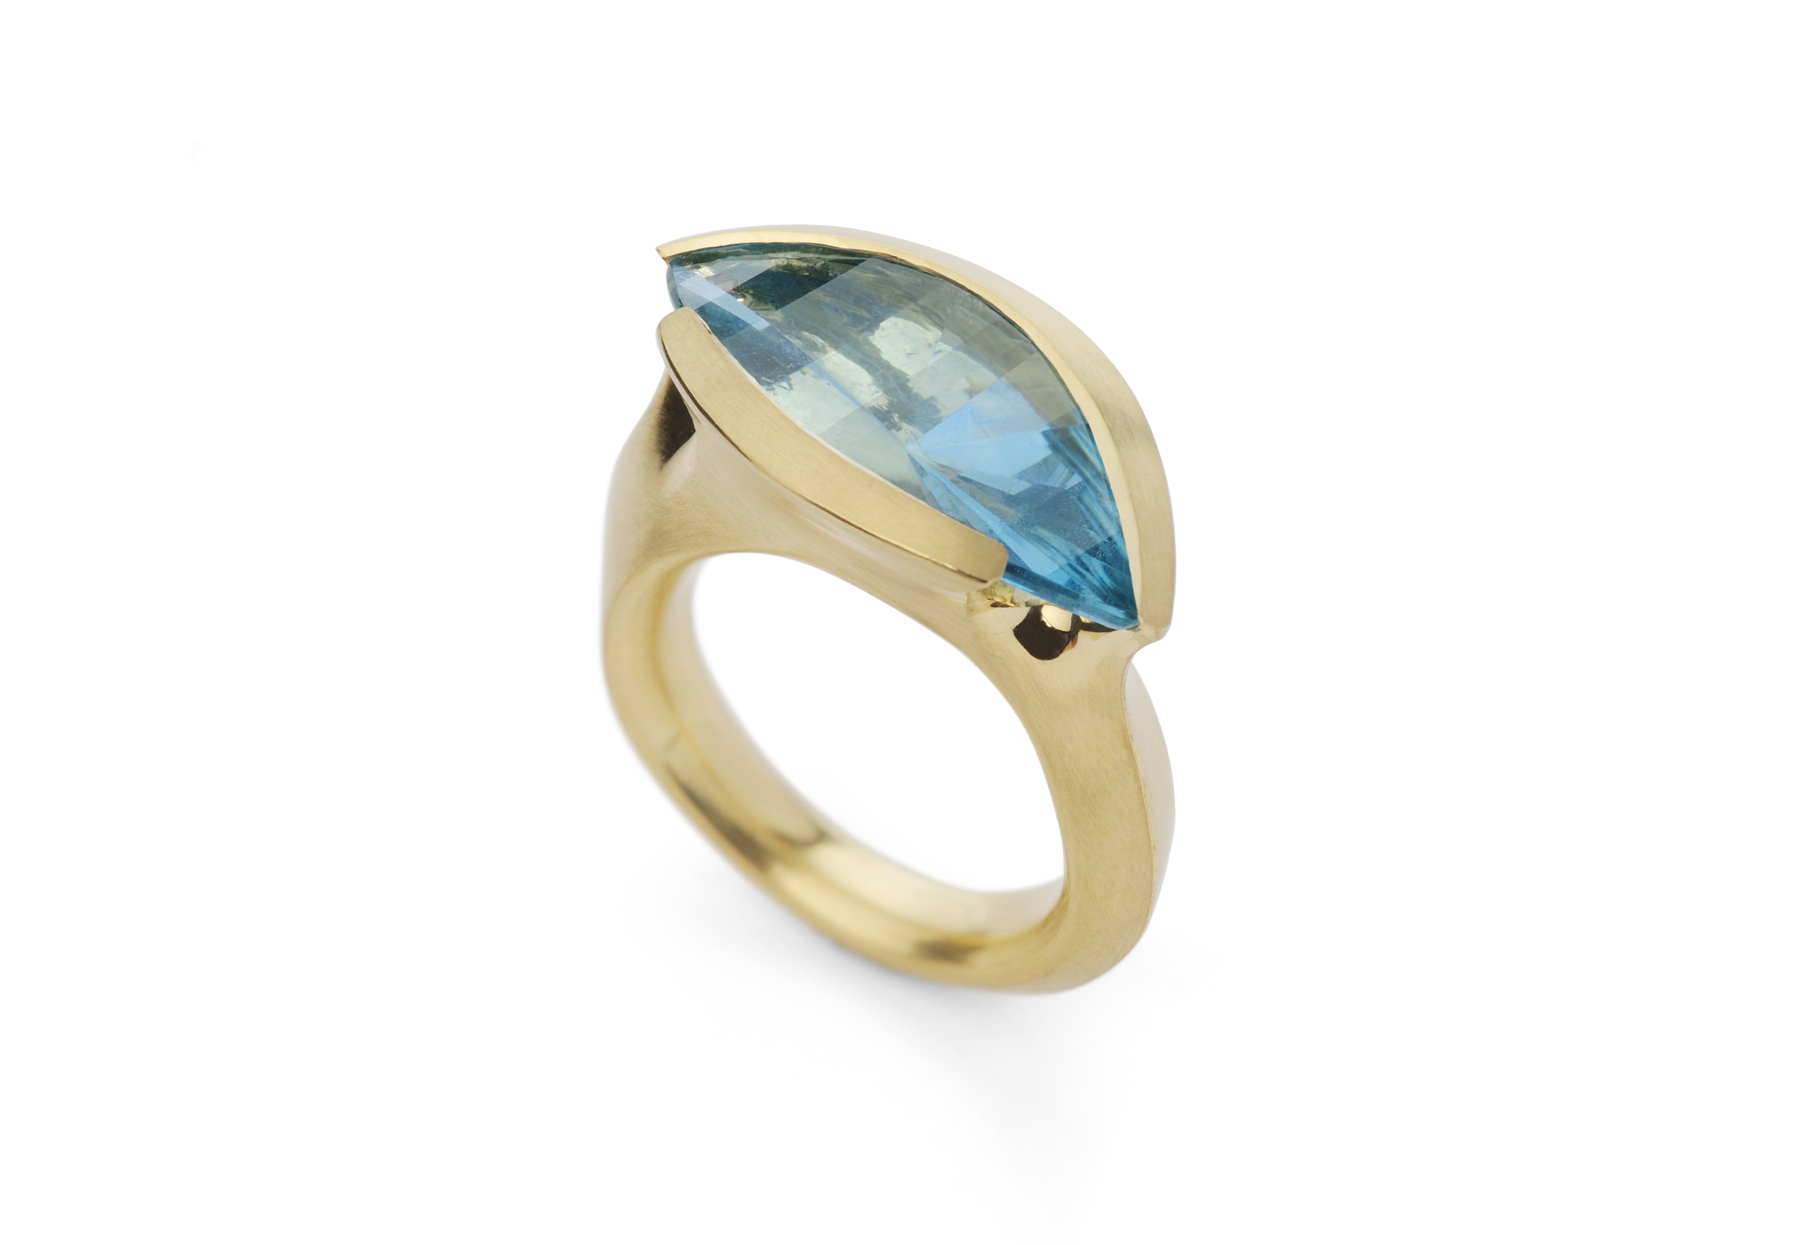 Carved yellow gold cocktail ring with aquamarine